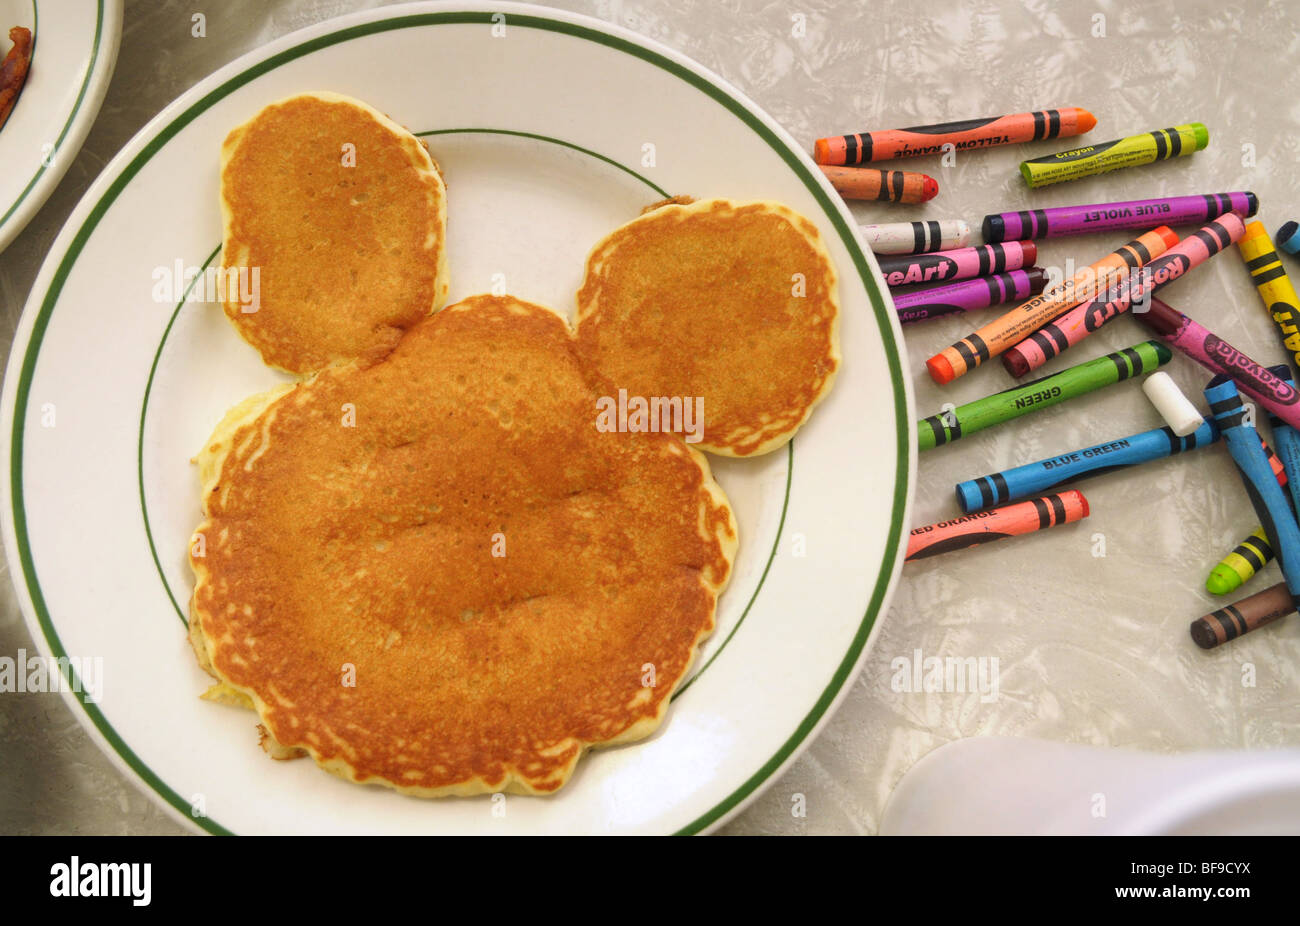 Crayons surround a child's mouse-shaped pancake on a stoneware plate during breakfast at a small diner. Stock Photo